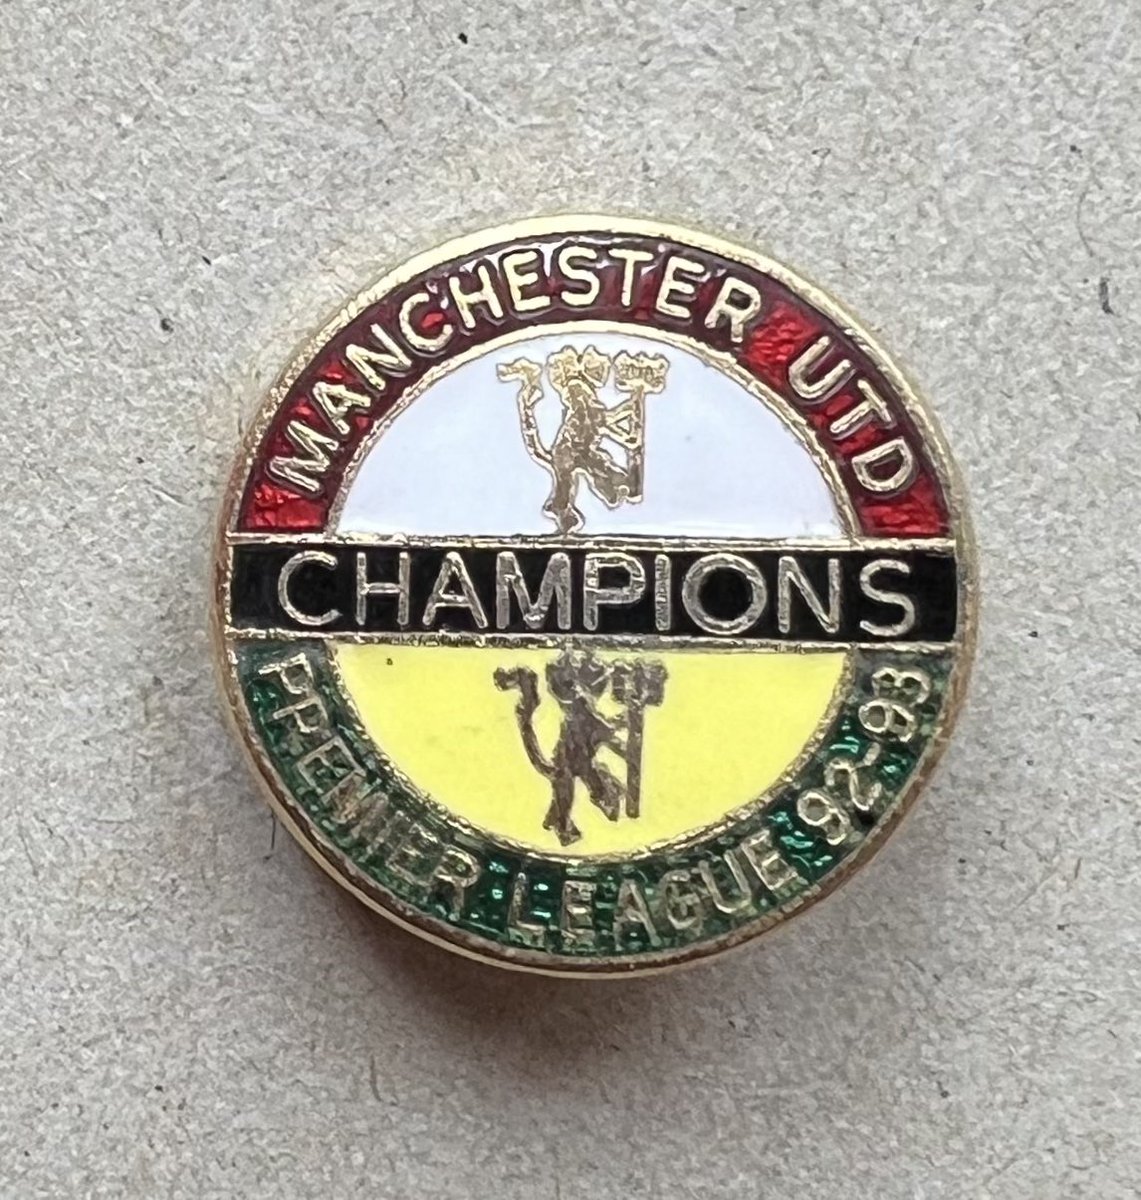 Today’s badge of the day. One to celebrate winning the league in 1993. #MUFC #UTFR #GGMU #ManchesterUnited